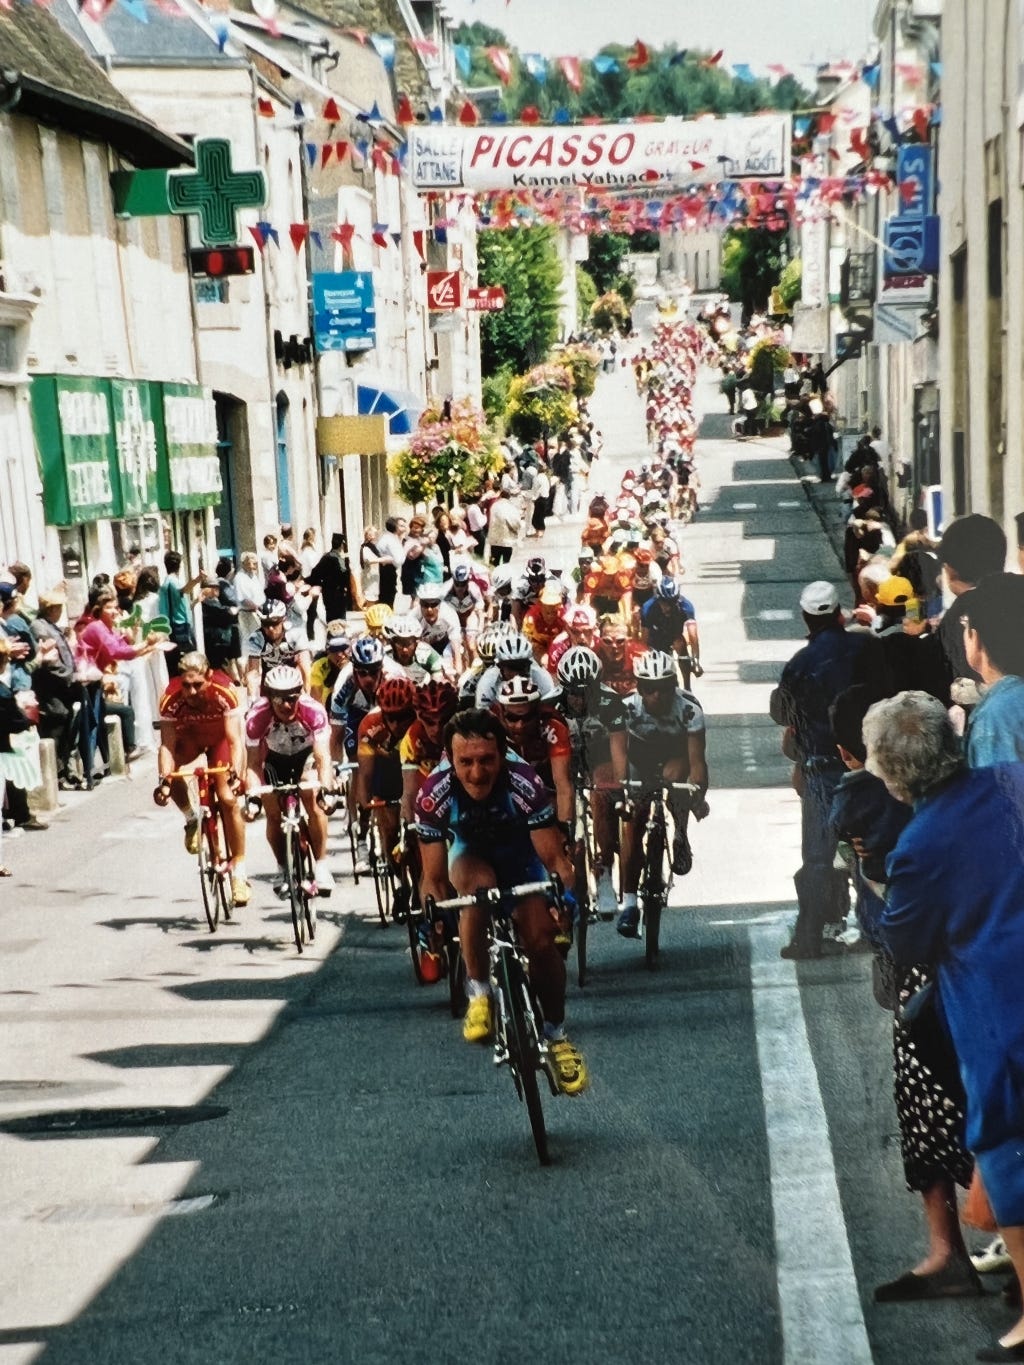 A group of professional cyclists from the Tour de France enter French town, 2000